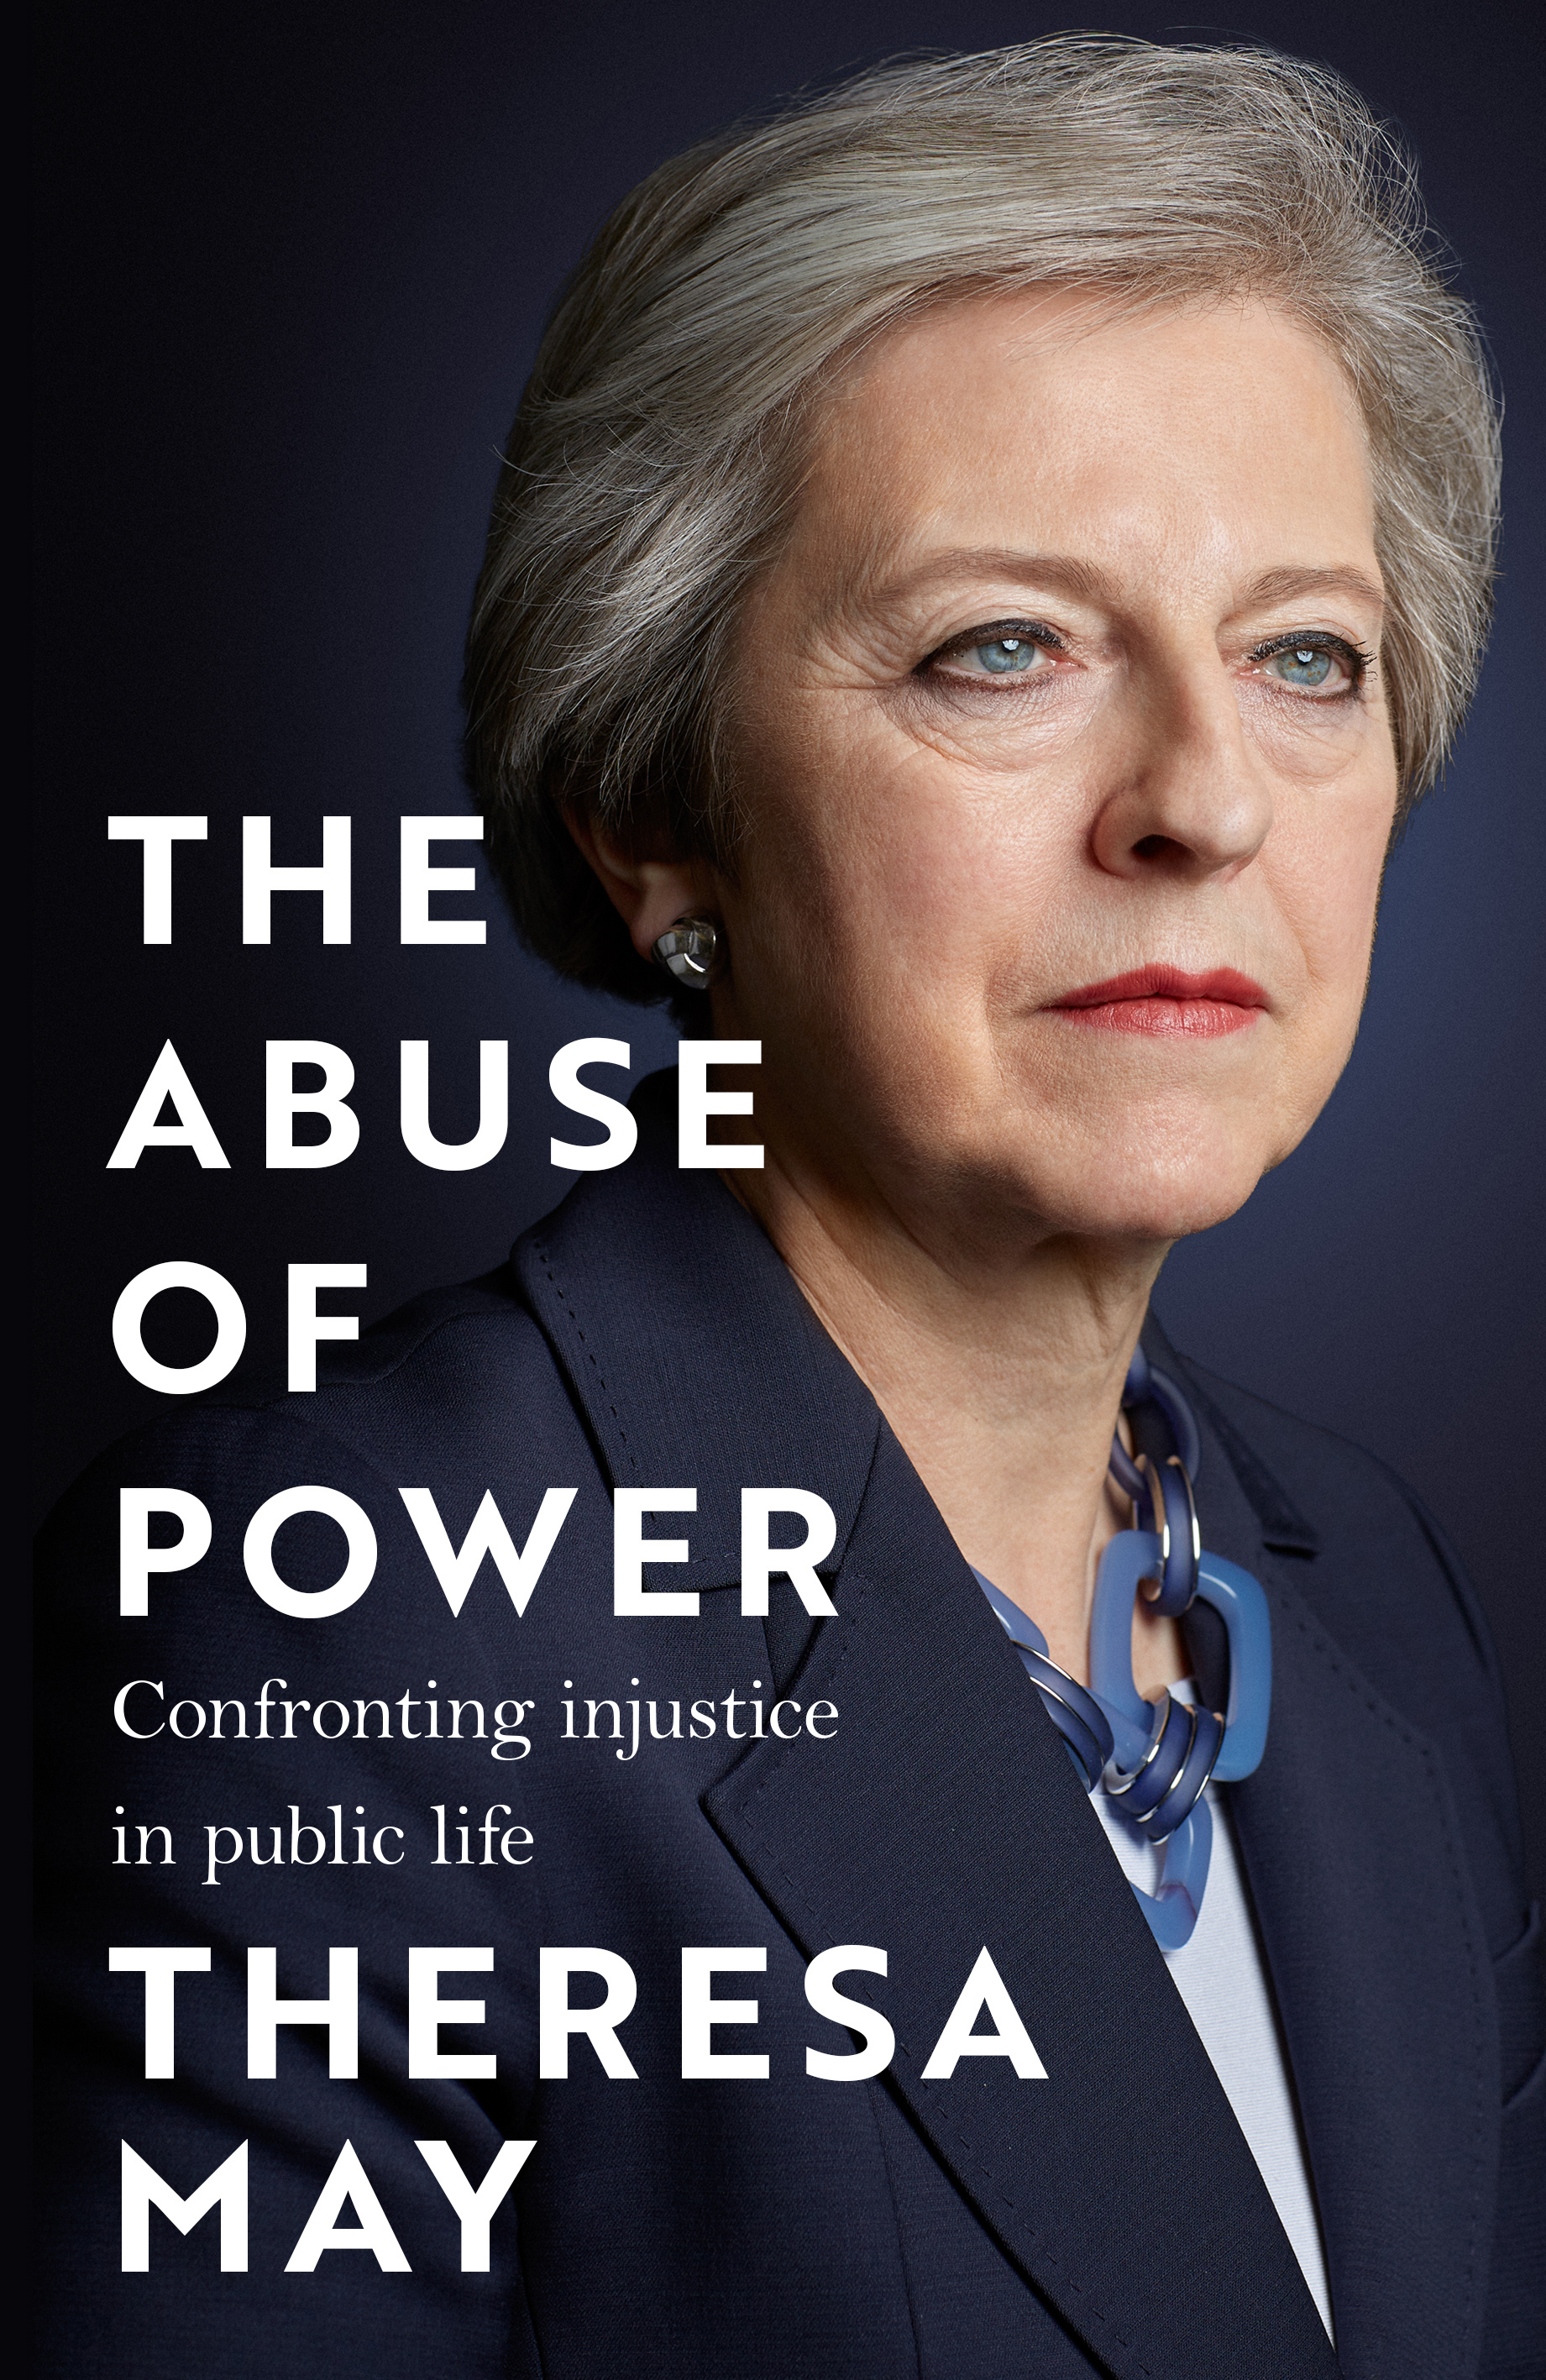 The Abuse of Power: Confronting injustice in public life